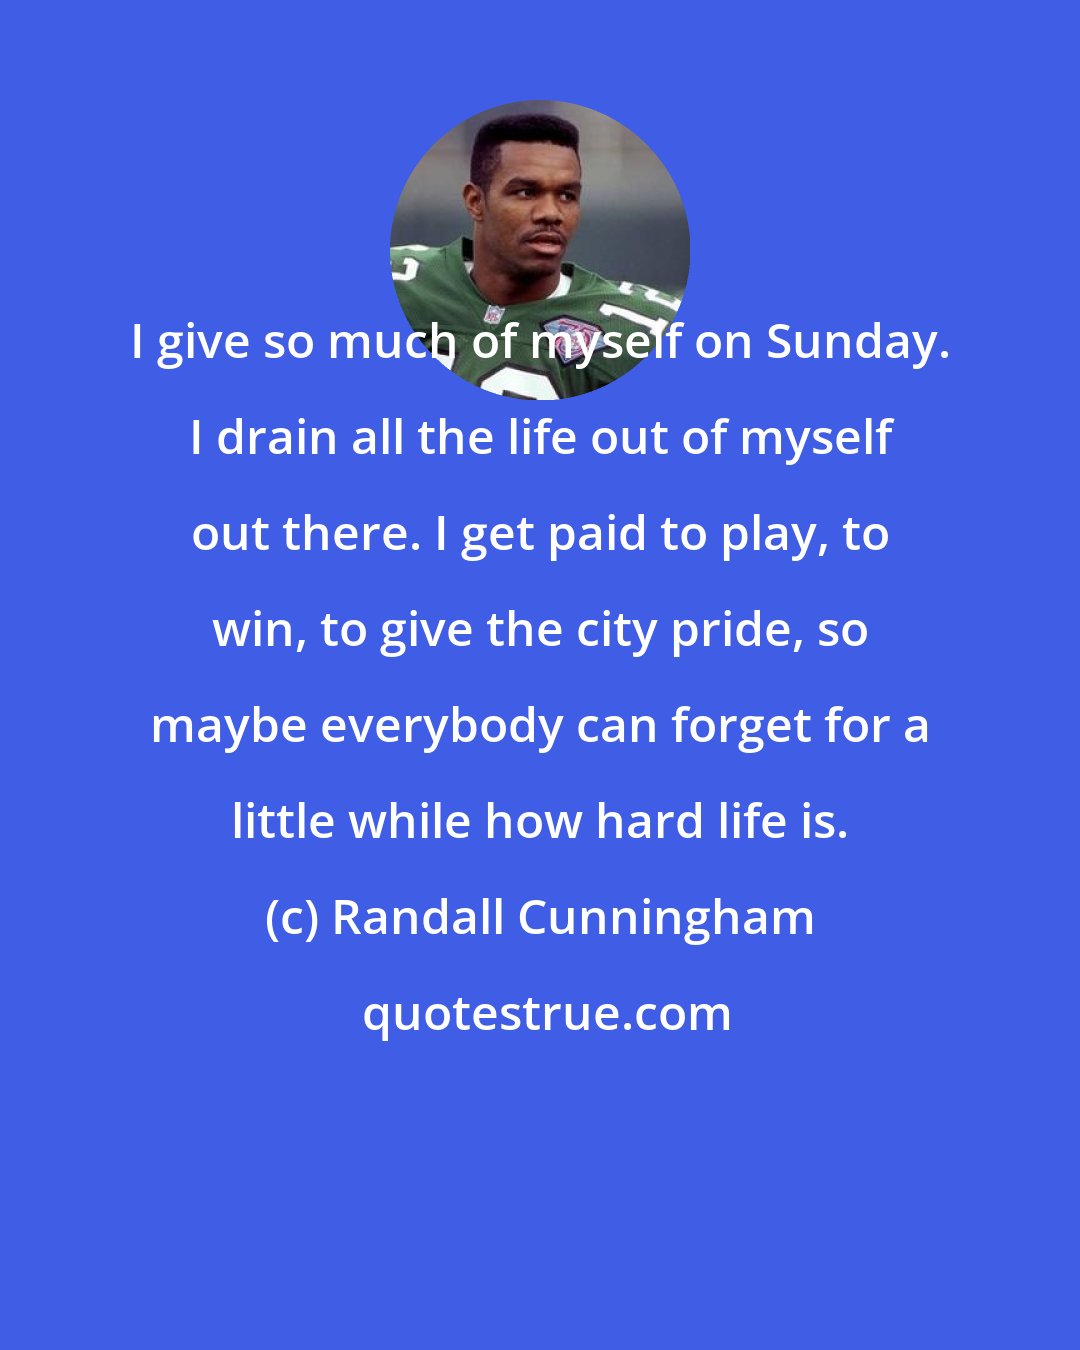 Randall Cunningham: I give so much of myself on Sunday. I drain all the life out of myself out there. I get paid to play, to win, to give the city pride, so maybe everybody can forget for a little while how hard life is.